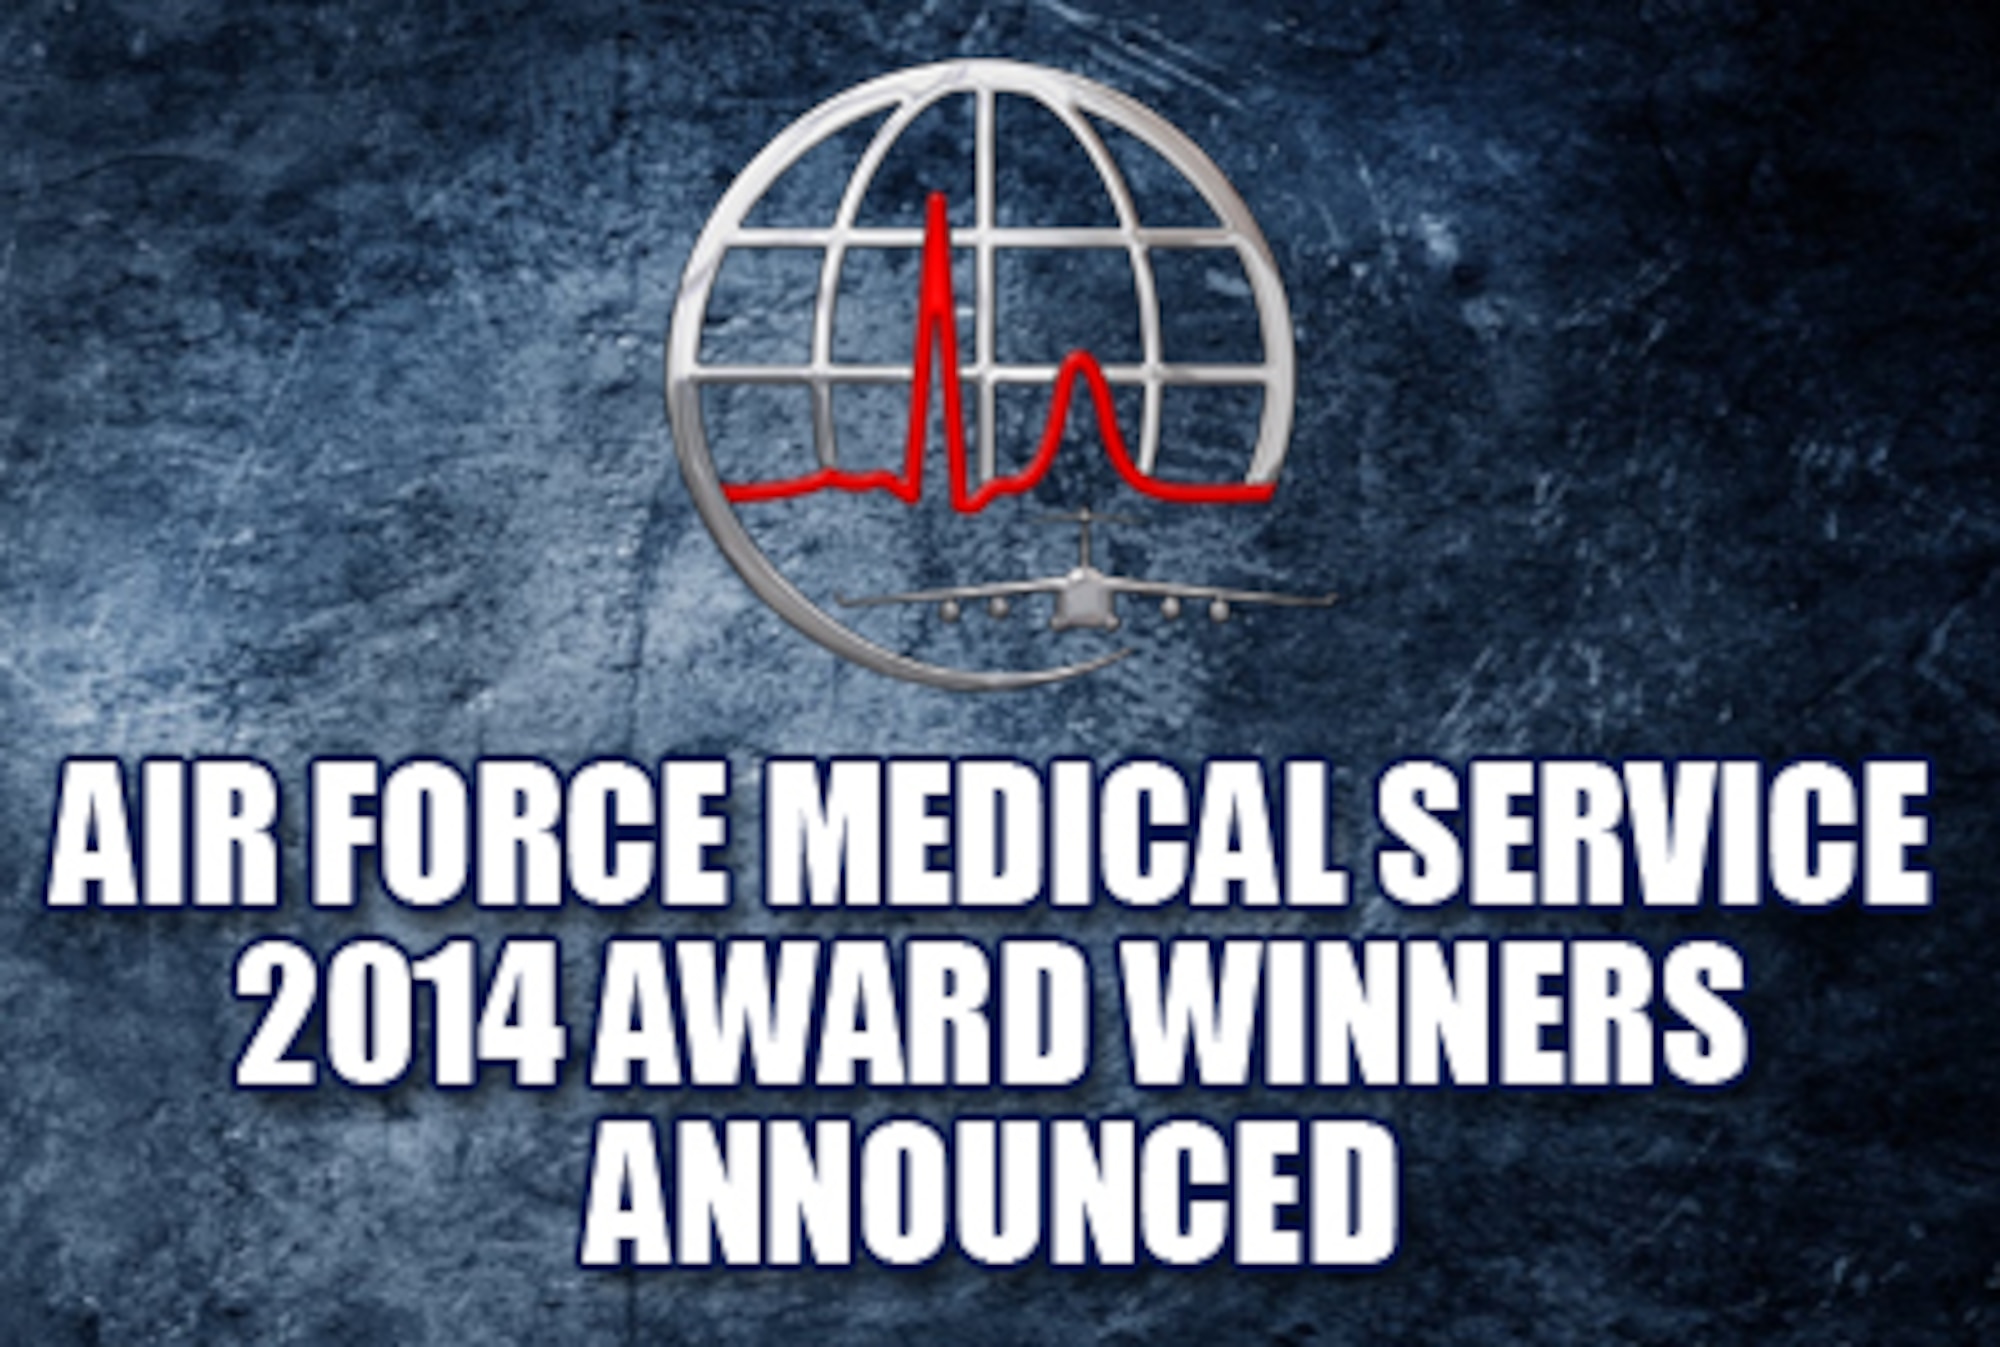 Air Force Medical Service 2014 award winners announced on Feb. 6, 2015. (U.S. Air Force graphic)
